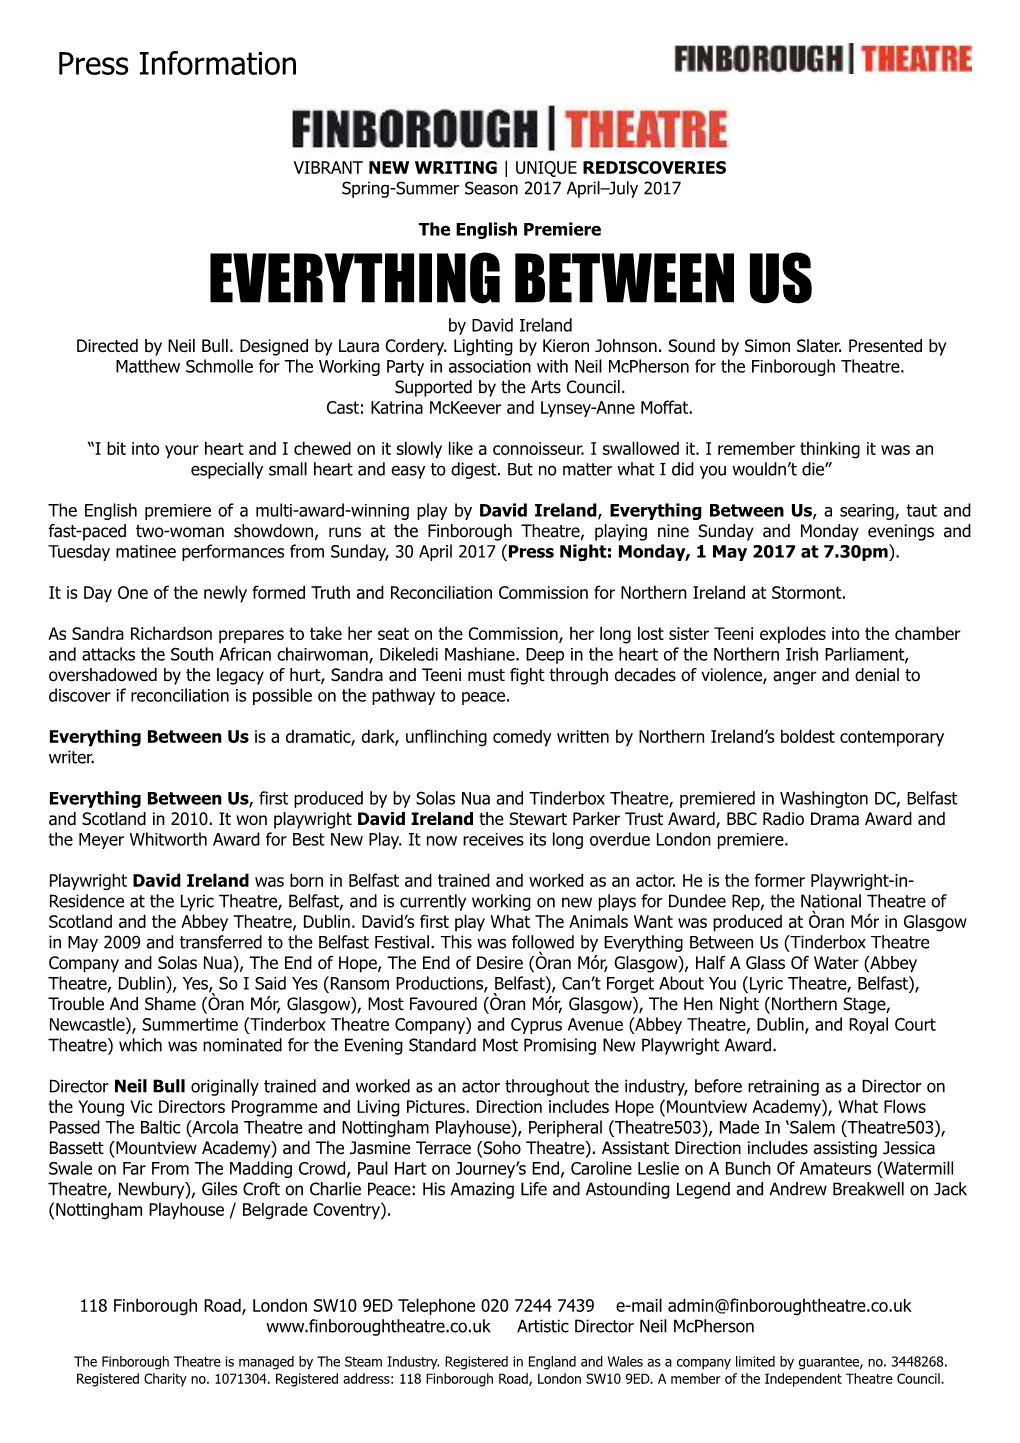 EVERYTHING BETWEEN US by David Ireland Directed by Neil Bull